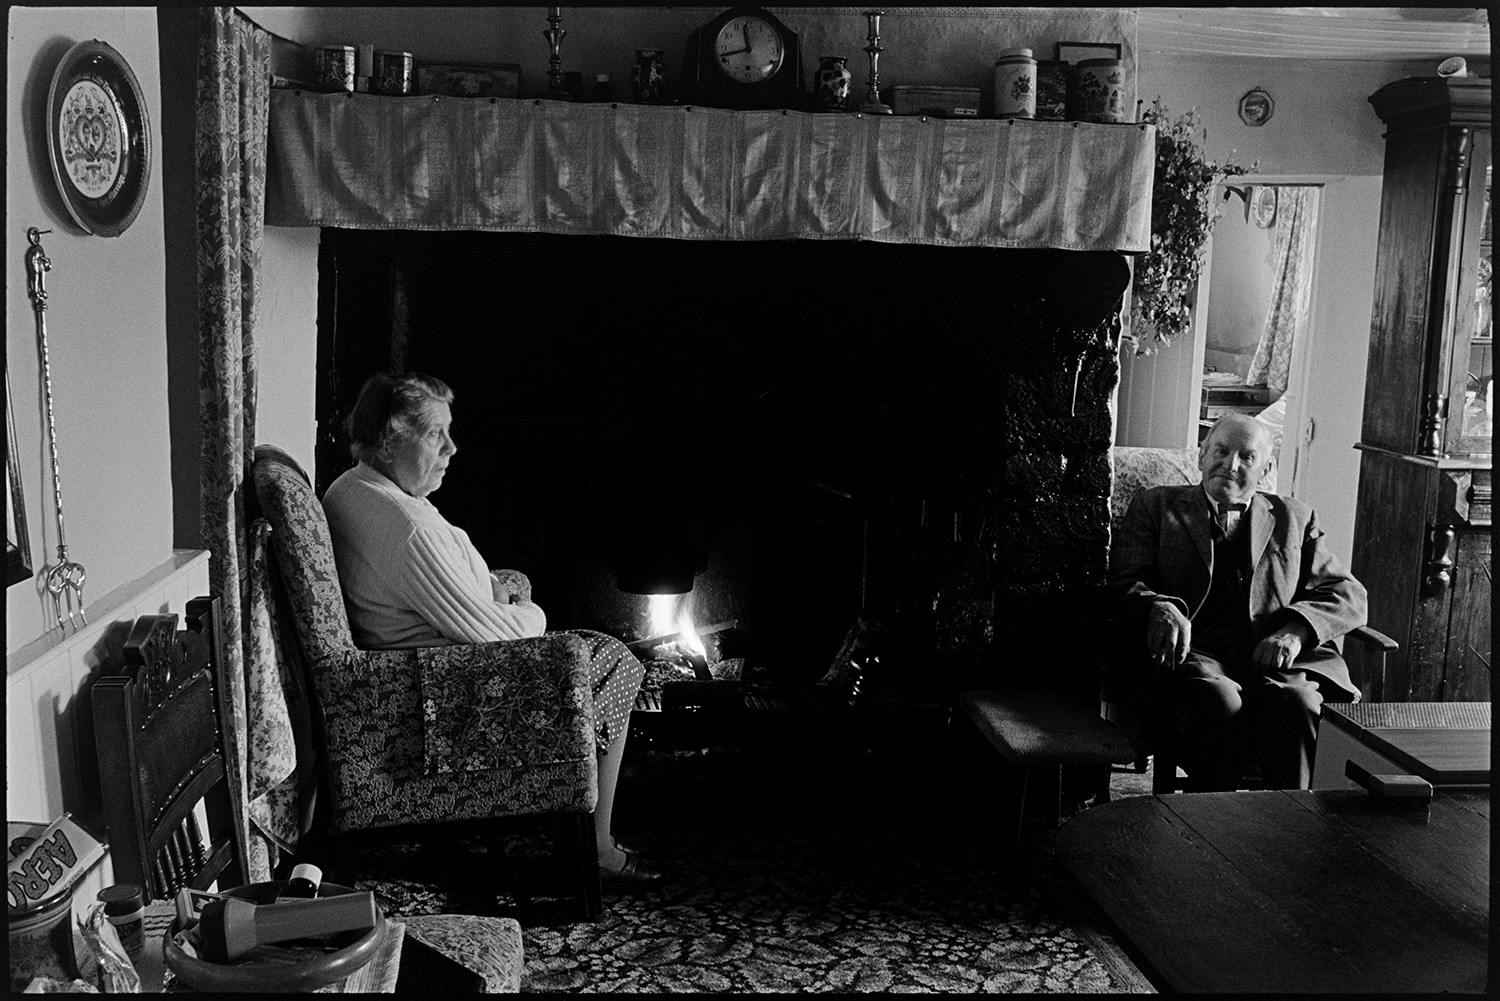 Cottage interior. Man and woman seated by open fire, reading, dresser with china, side table.
[Edith Crocker and Henry Crocker, brother and sister, are sitting by an open fire in their cottage in Monkokehampton. They are both sitting in armchairs. A royal wedding plate and toasting fork hang on the wall and a clock, candlesticks and jars are displayed on the mantelpiece above the fireplace.]